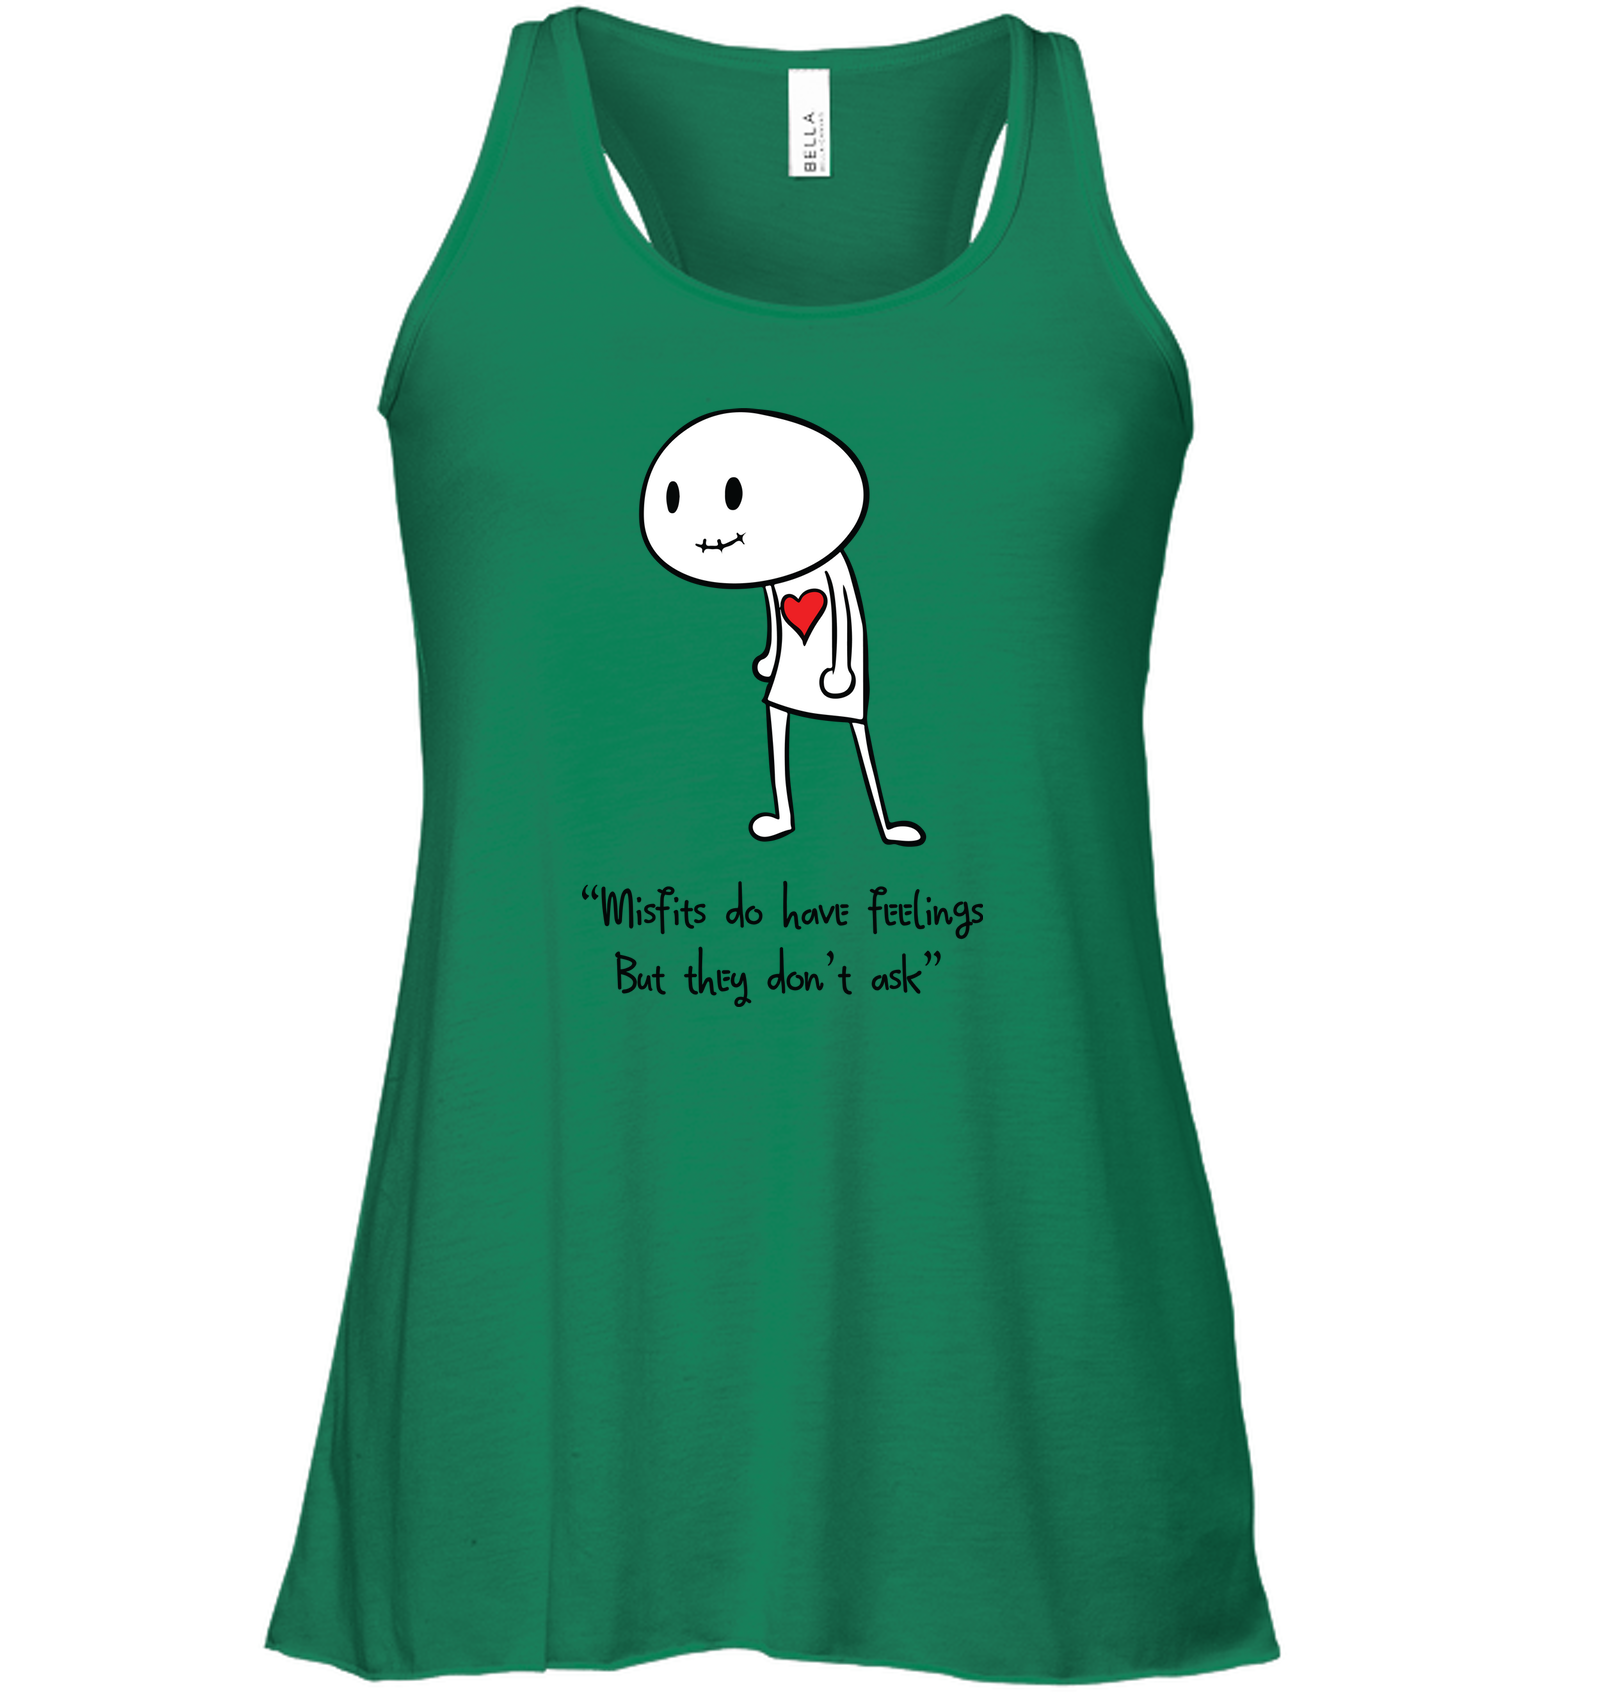 Misfits do have feelings, but they don't ask - Bella + Canvas Women's Flowy Racerback Tank